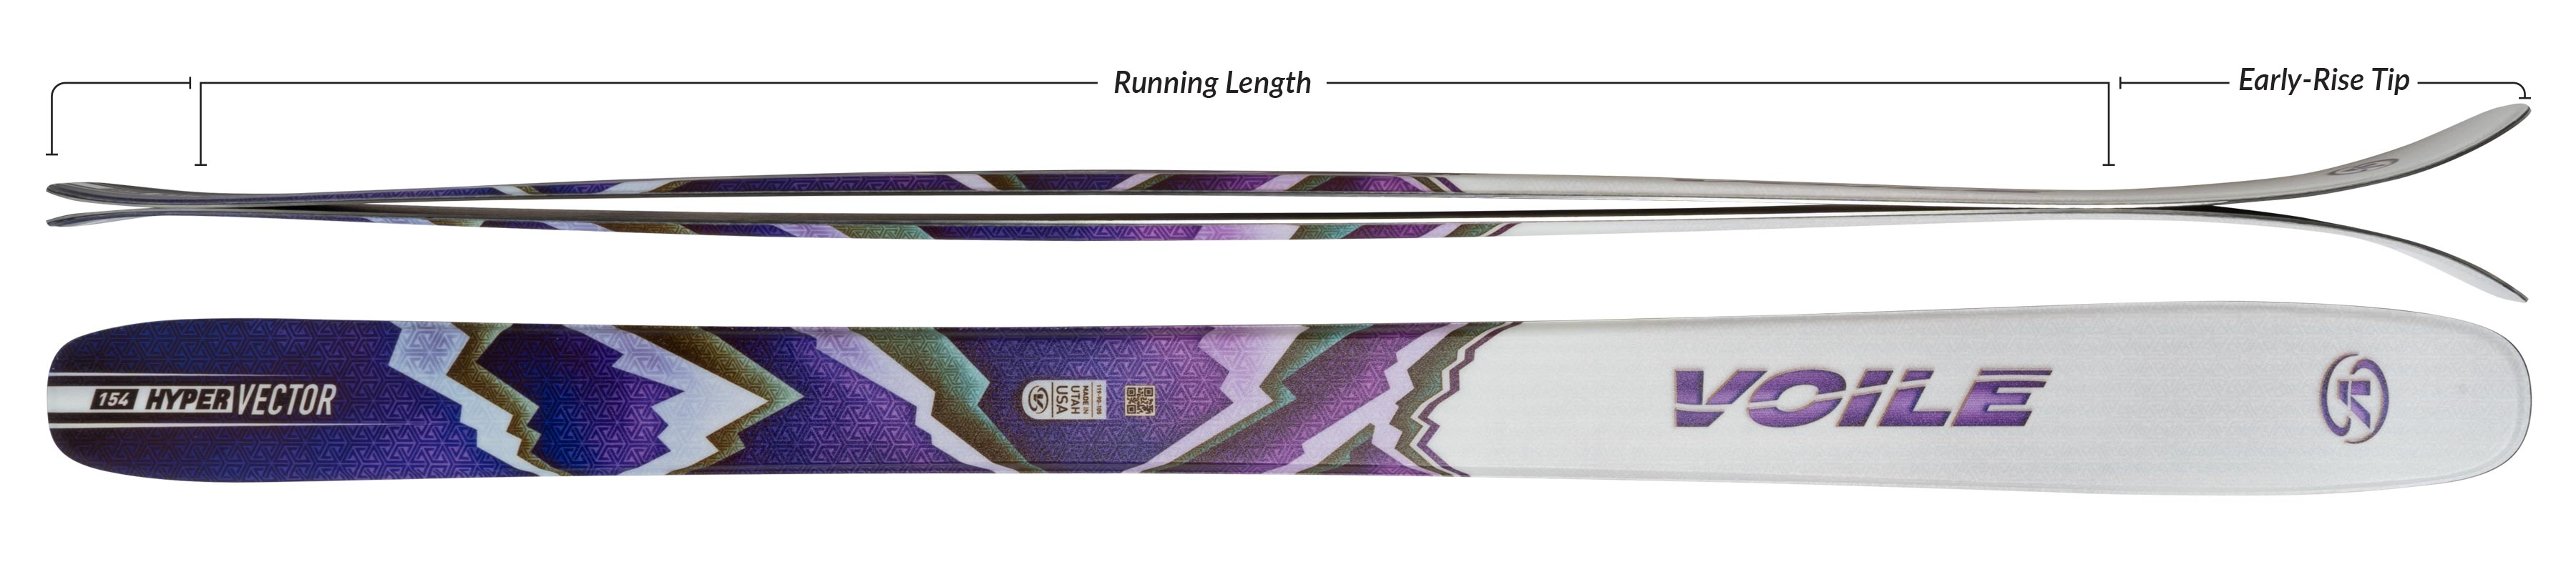 Voile Women's HyperVector Skis Camber Profile